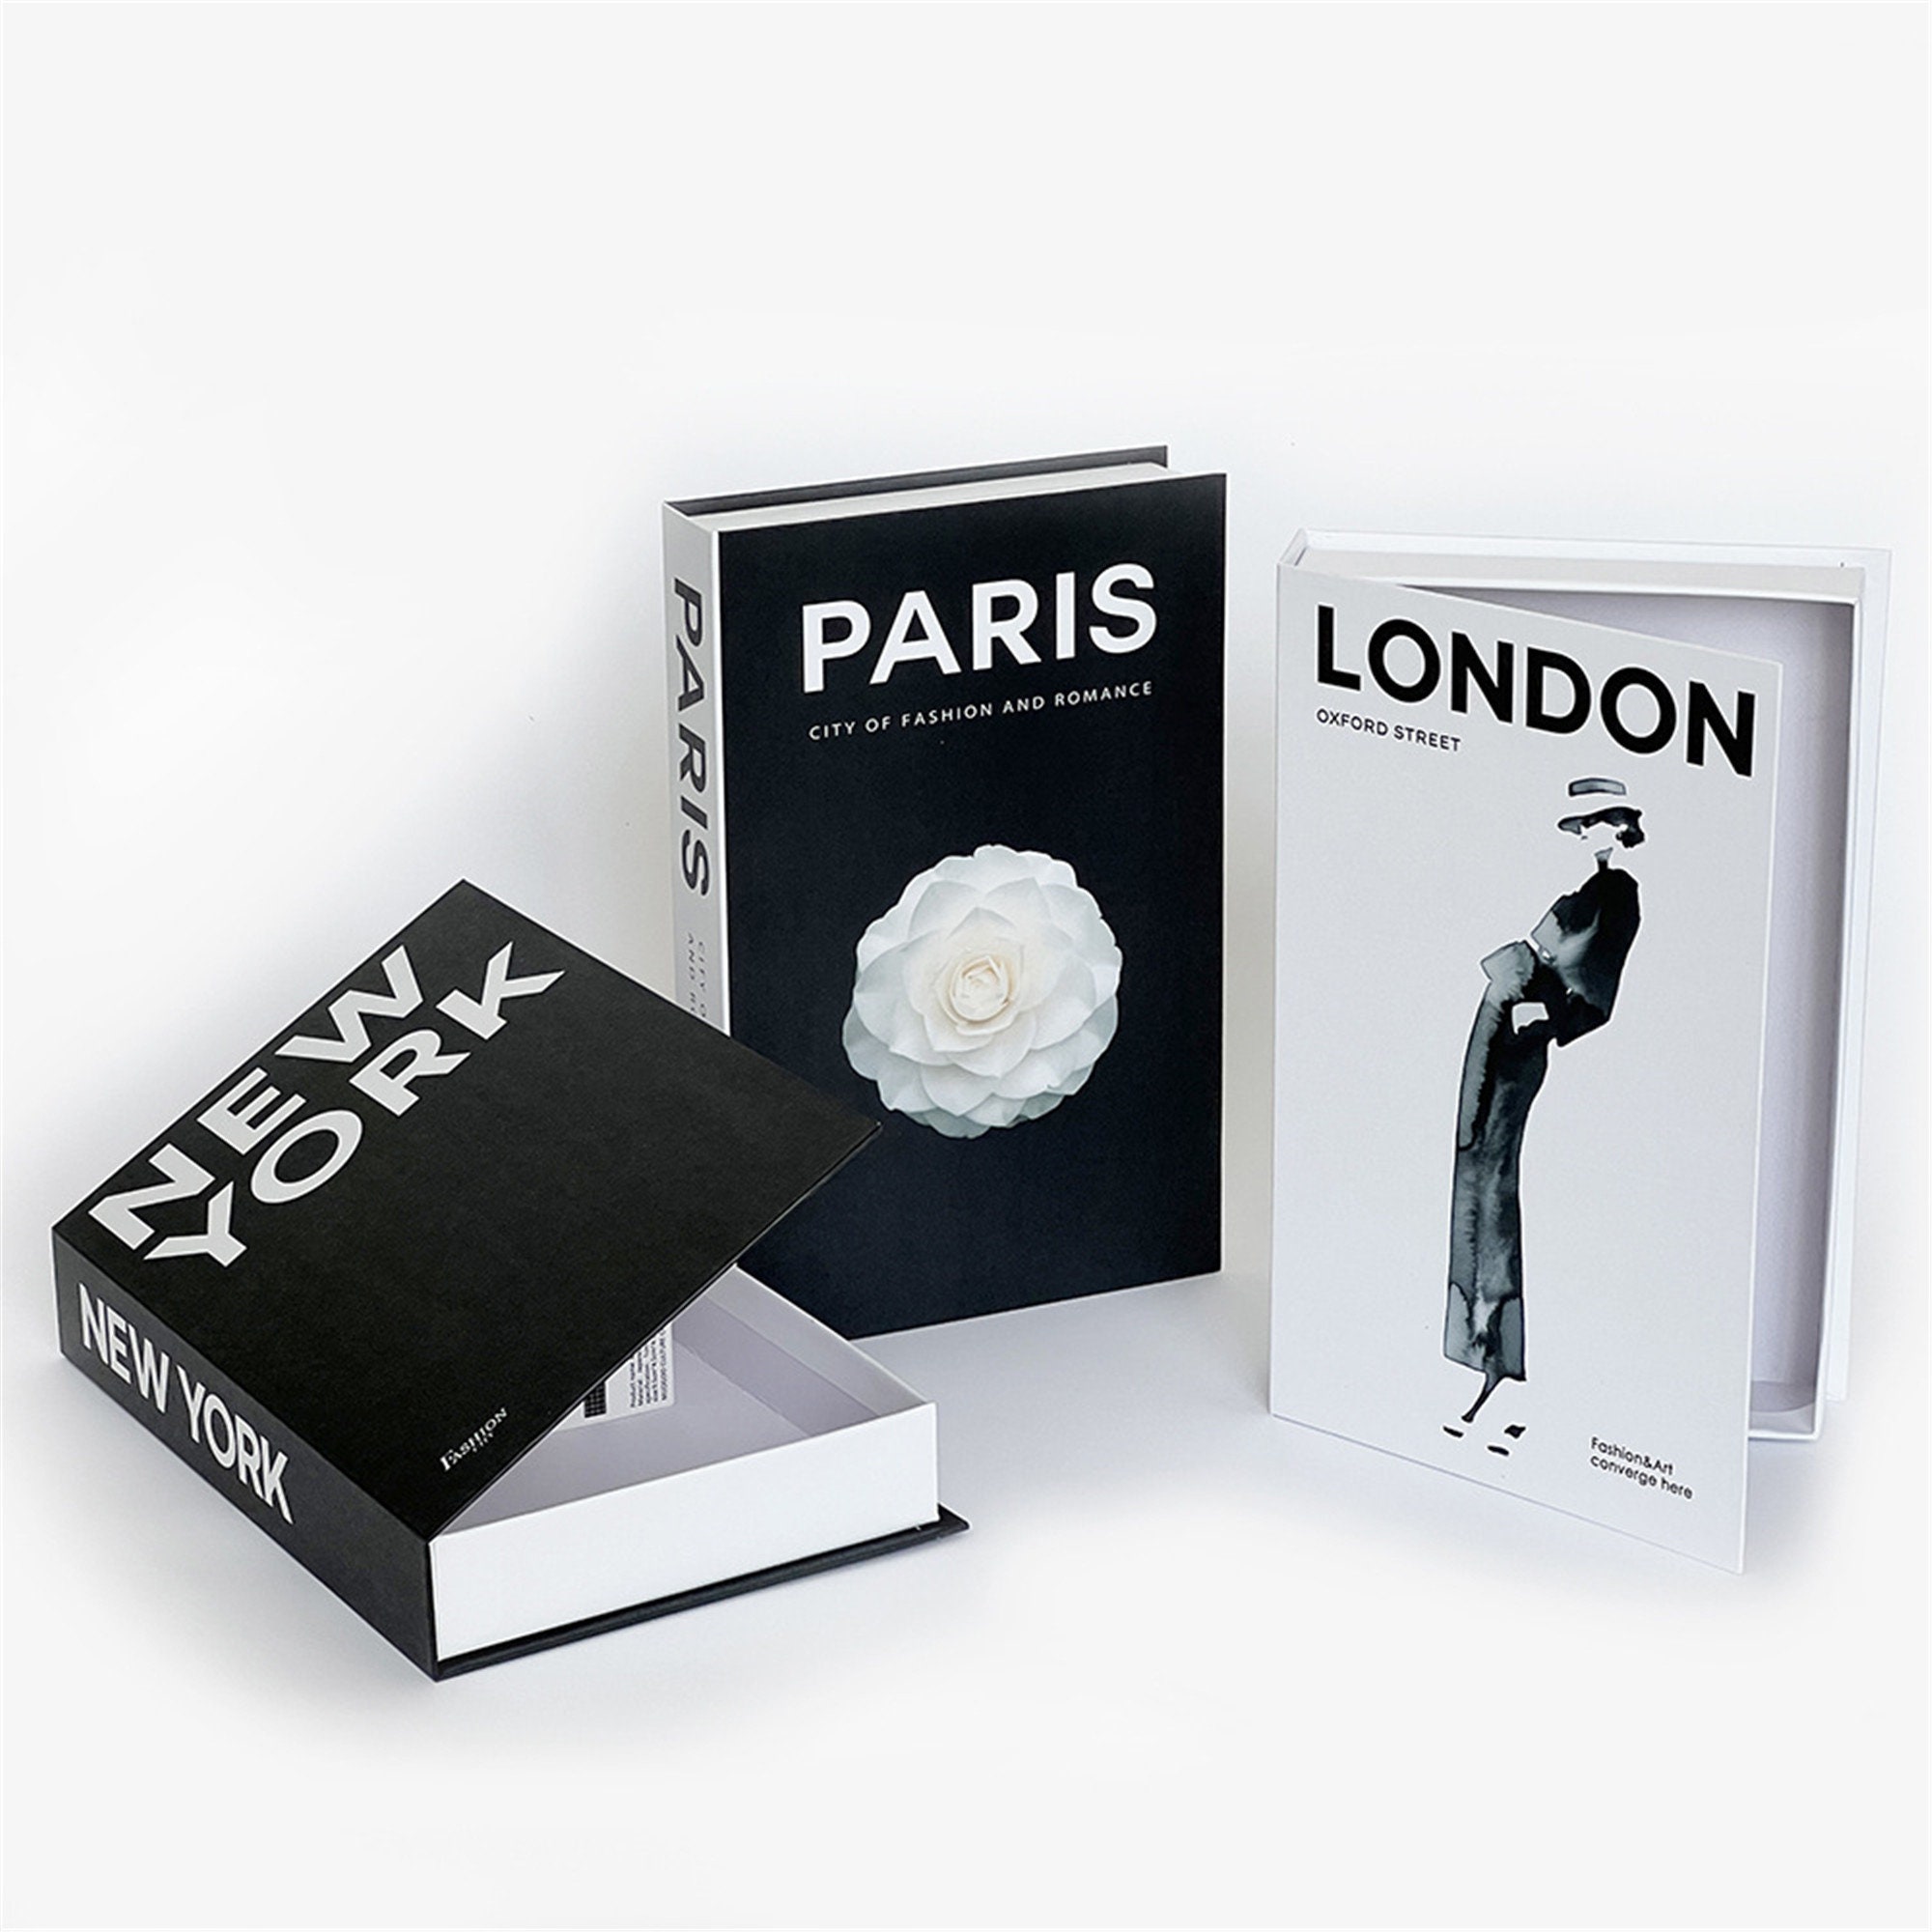 Buy Chanel Book Decor Online In India -  India